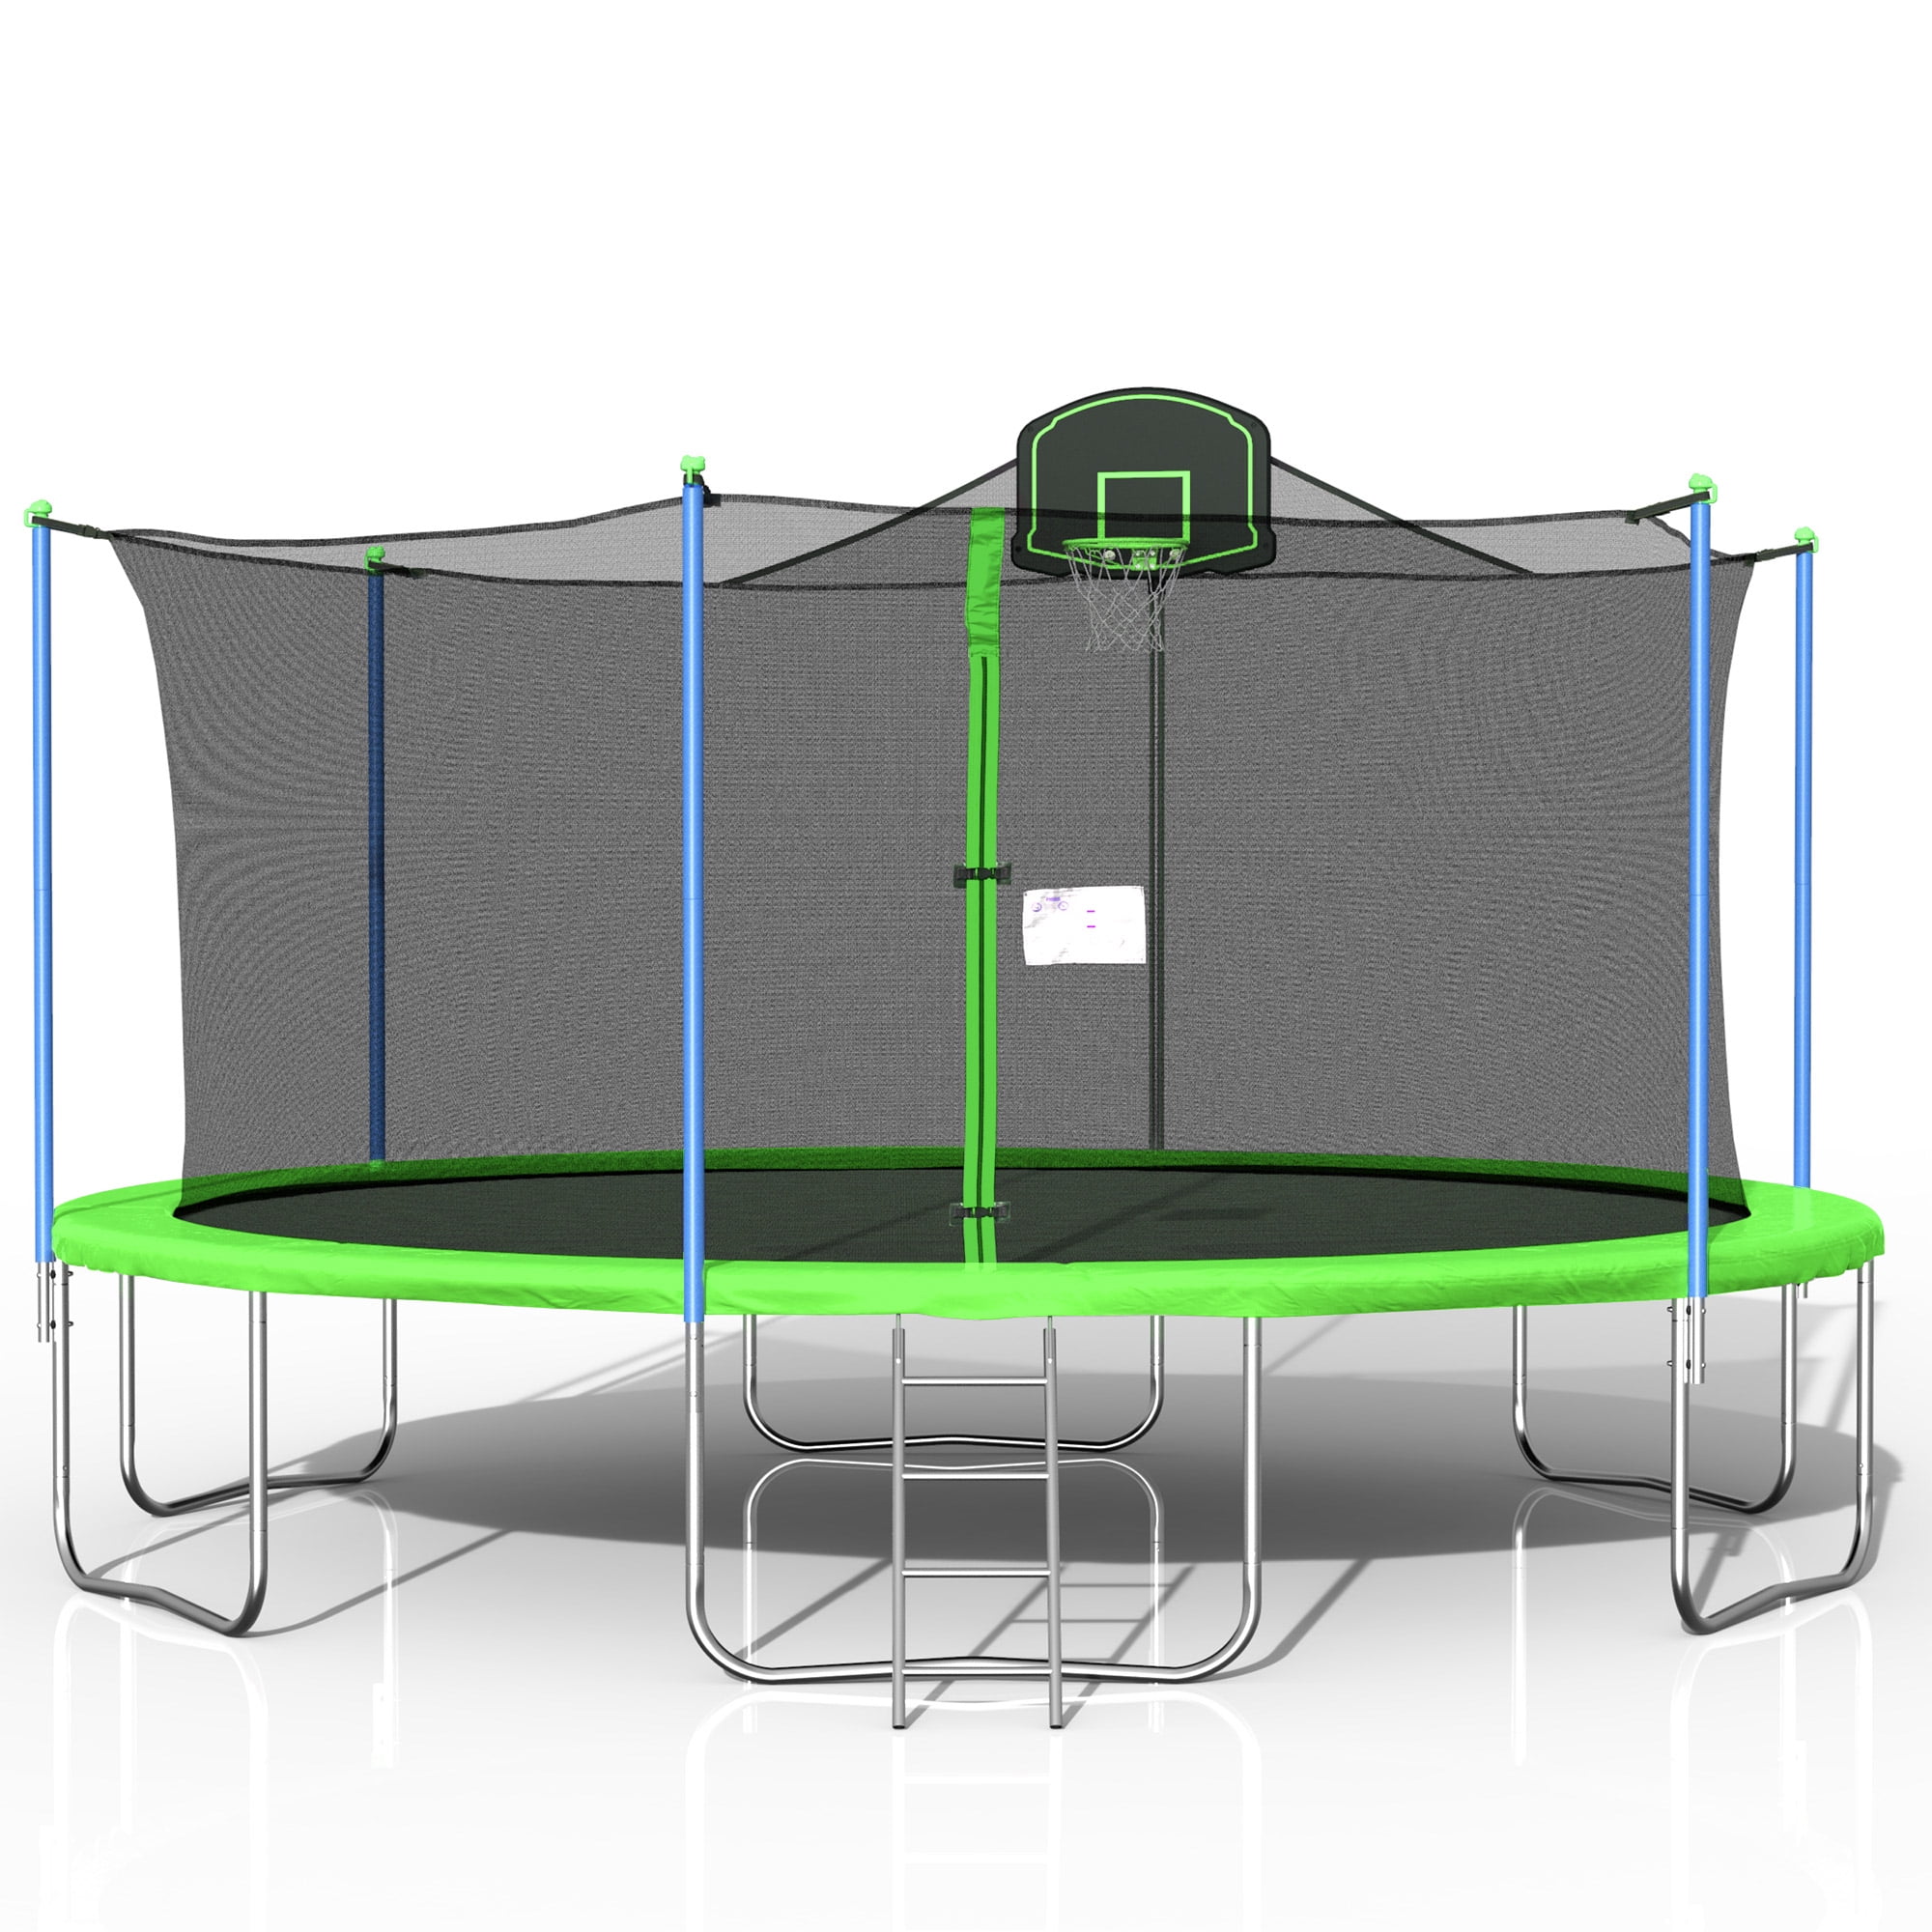 16 FT Outdoor Trampoline with Basketball Hoop, Outdoor Trampoline with Safety Enclosure Net, Circular Trampolines for Adults/Kids, Family Jumping and Ladder, Kids Basketball Trampoline, Q11381